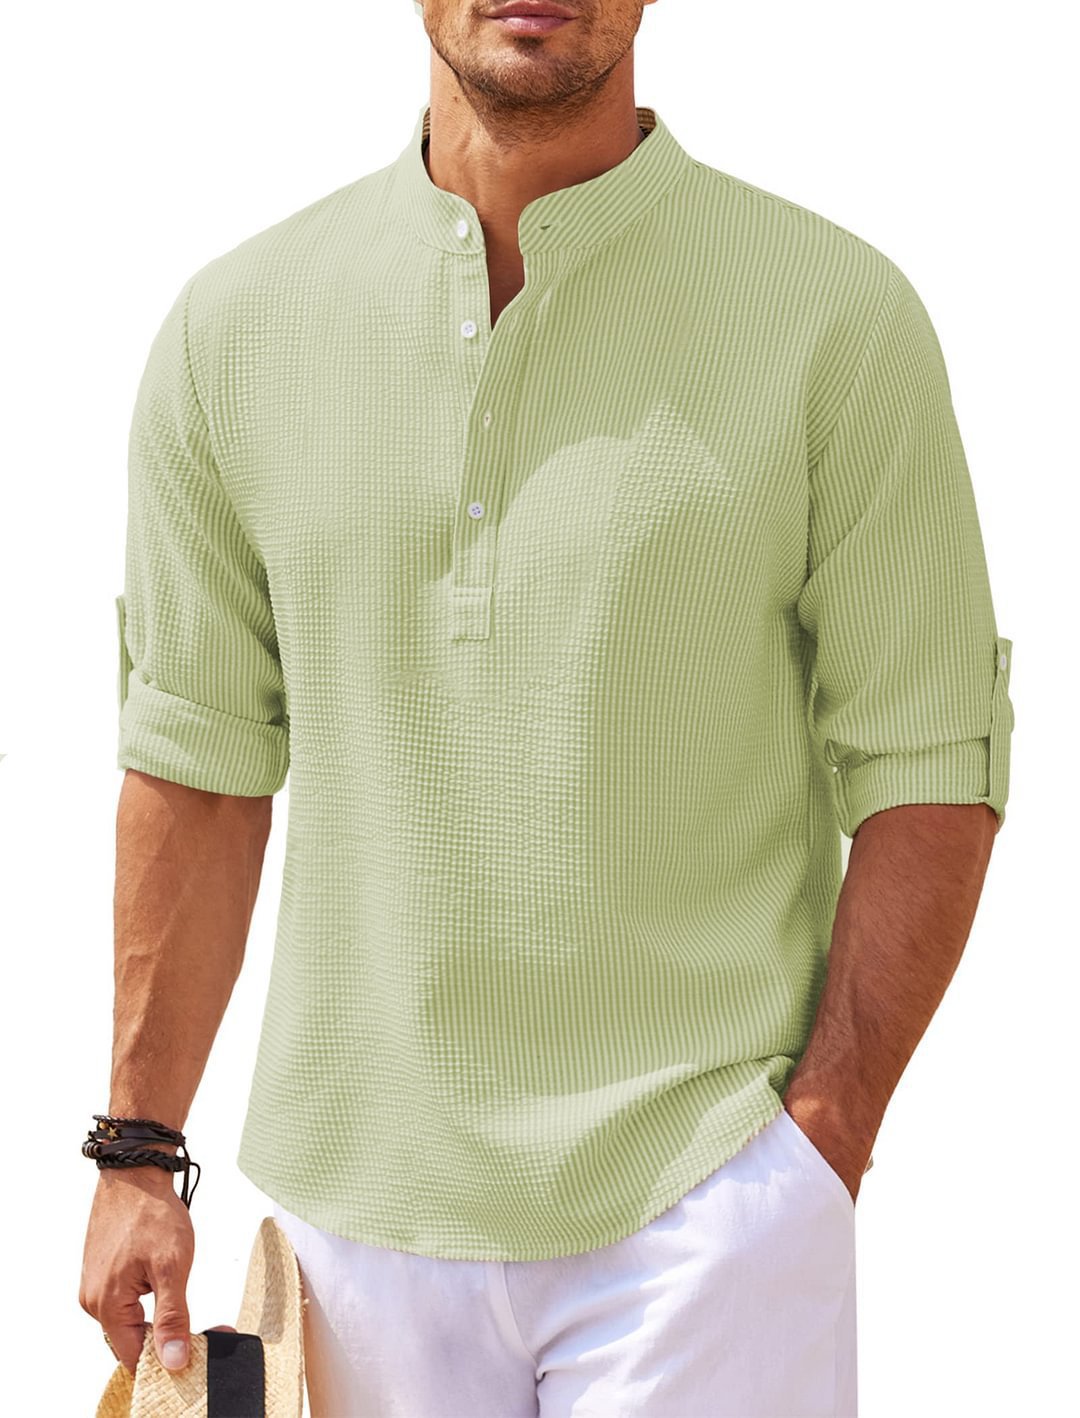 Men's Pineapple Texture Stand Collar Button Shirt in various sizes and colors